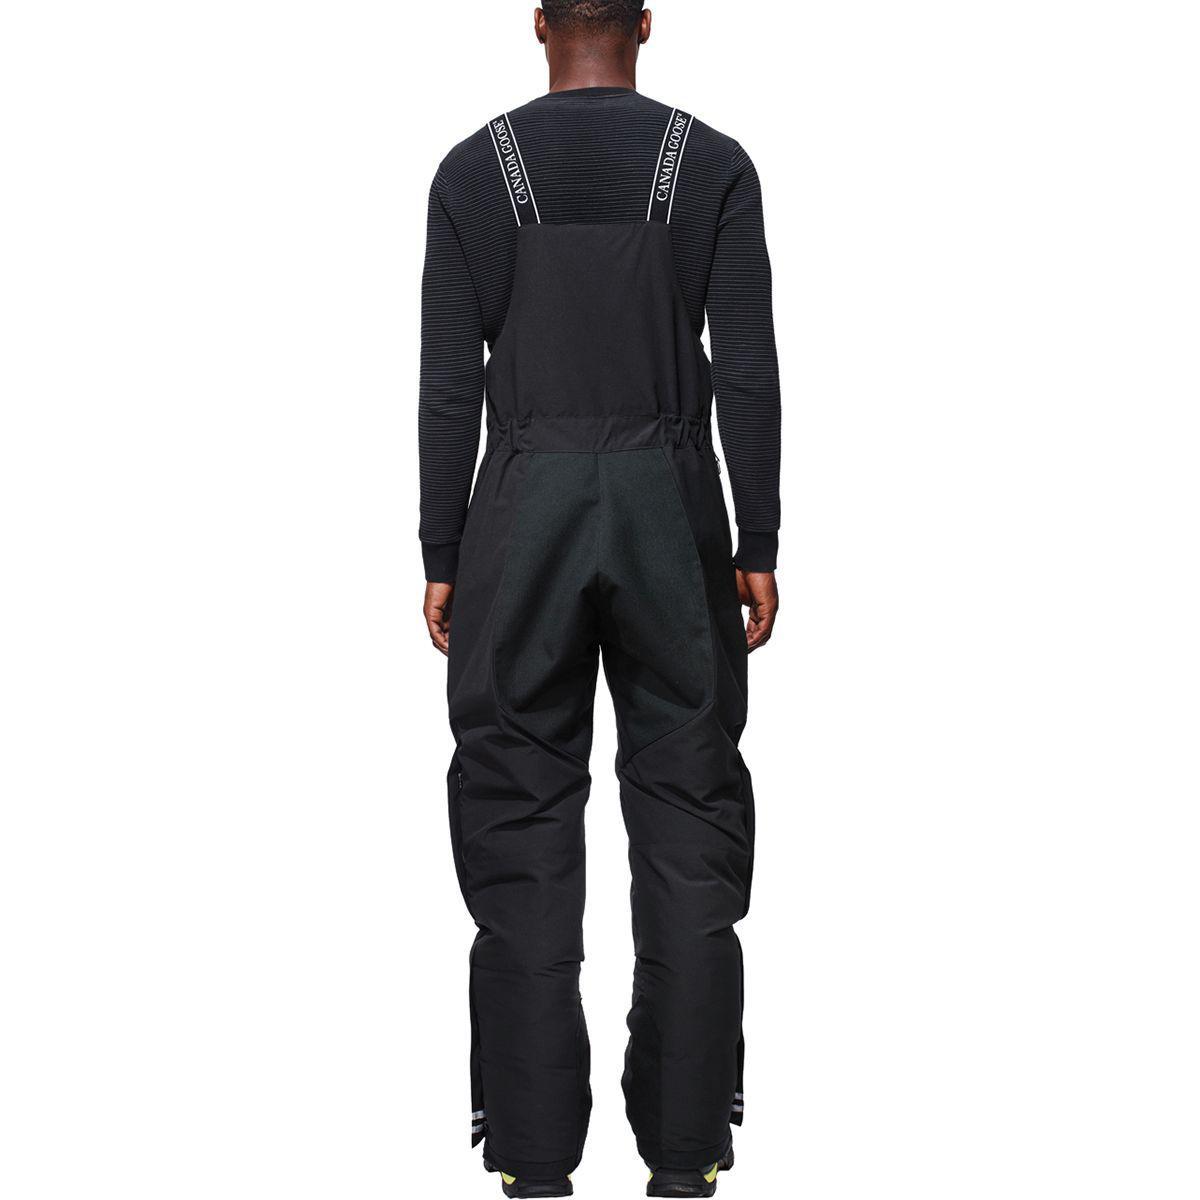 Canada Goose Goose Tundra Down Bib Overall in Black for Men - Lyst